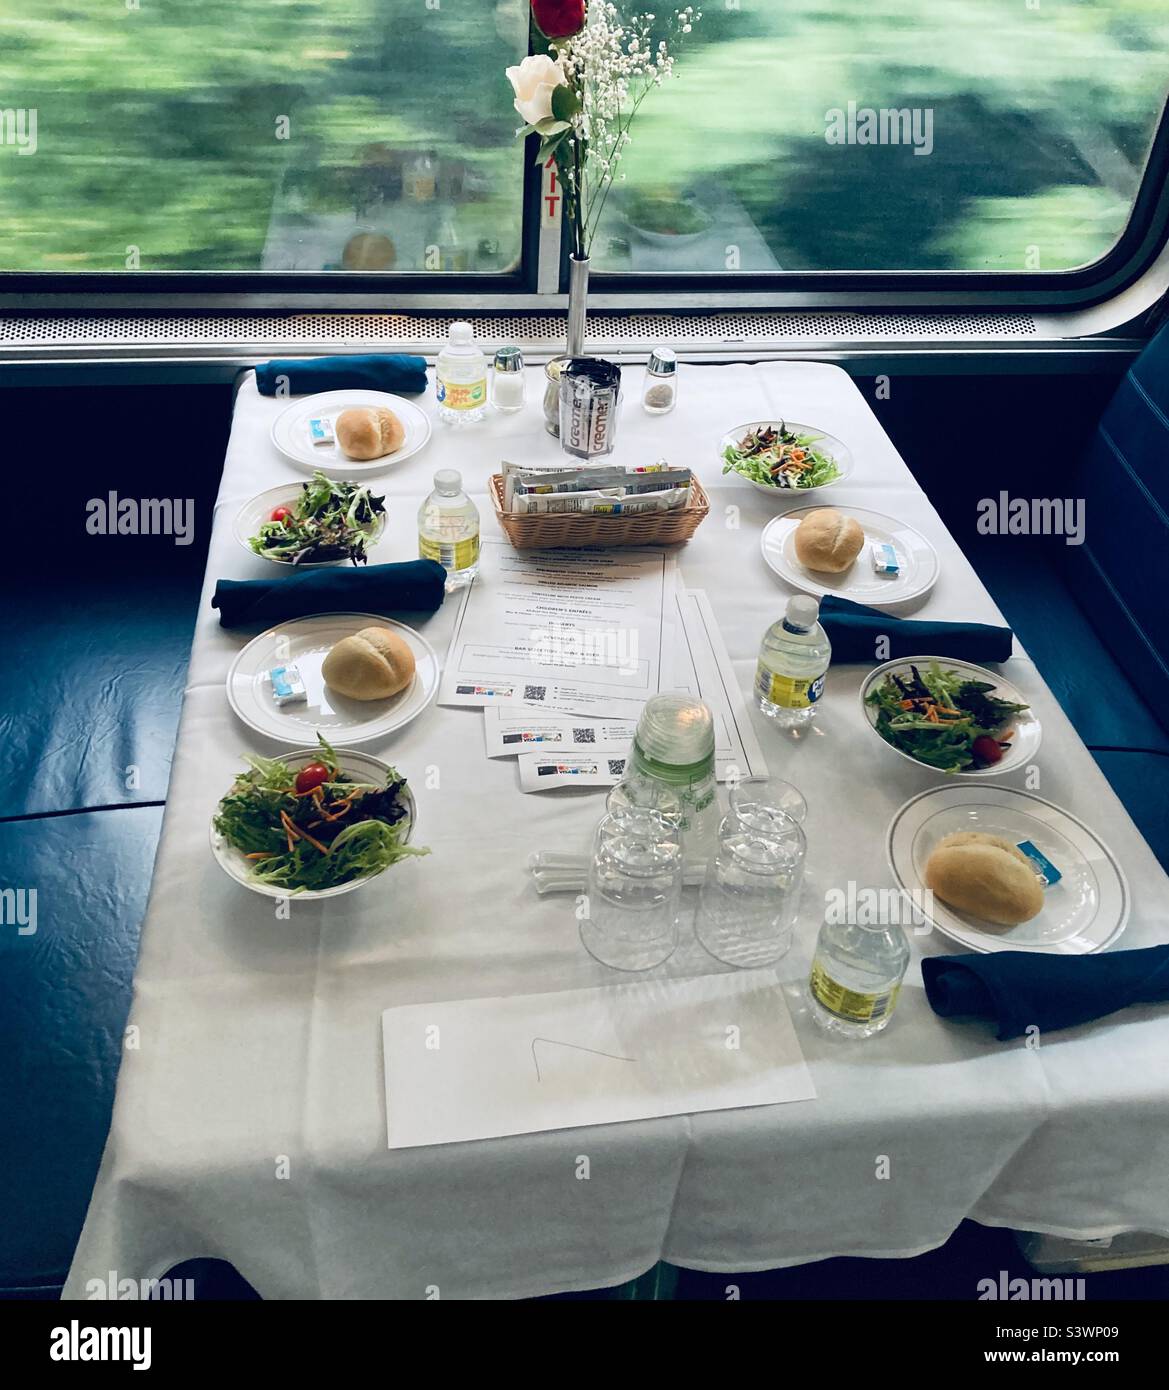 A table setting of formal dining service on the rail cars Stock Photo